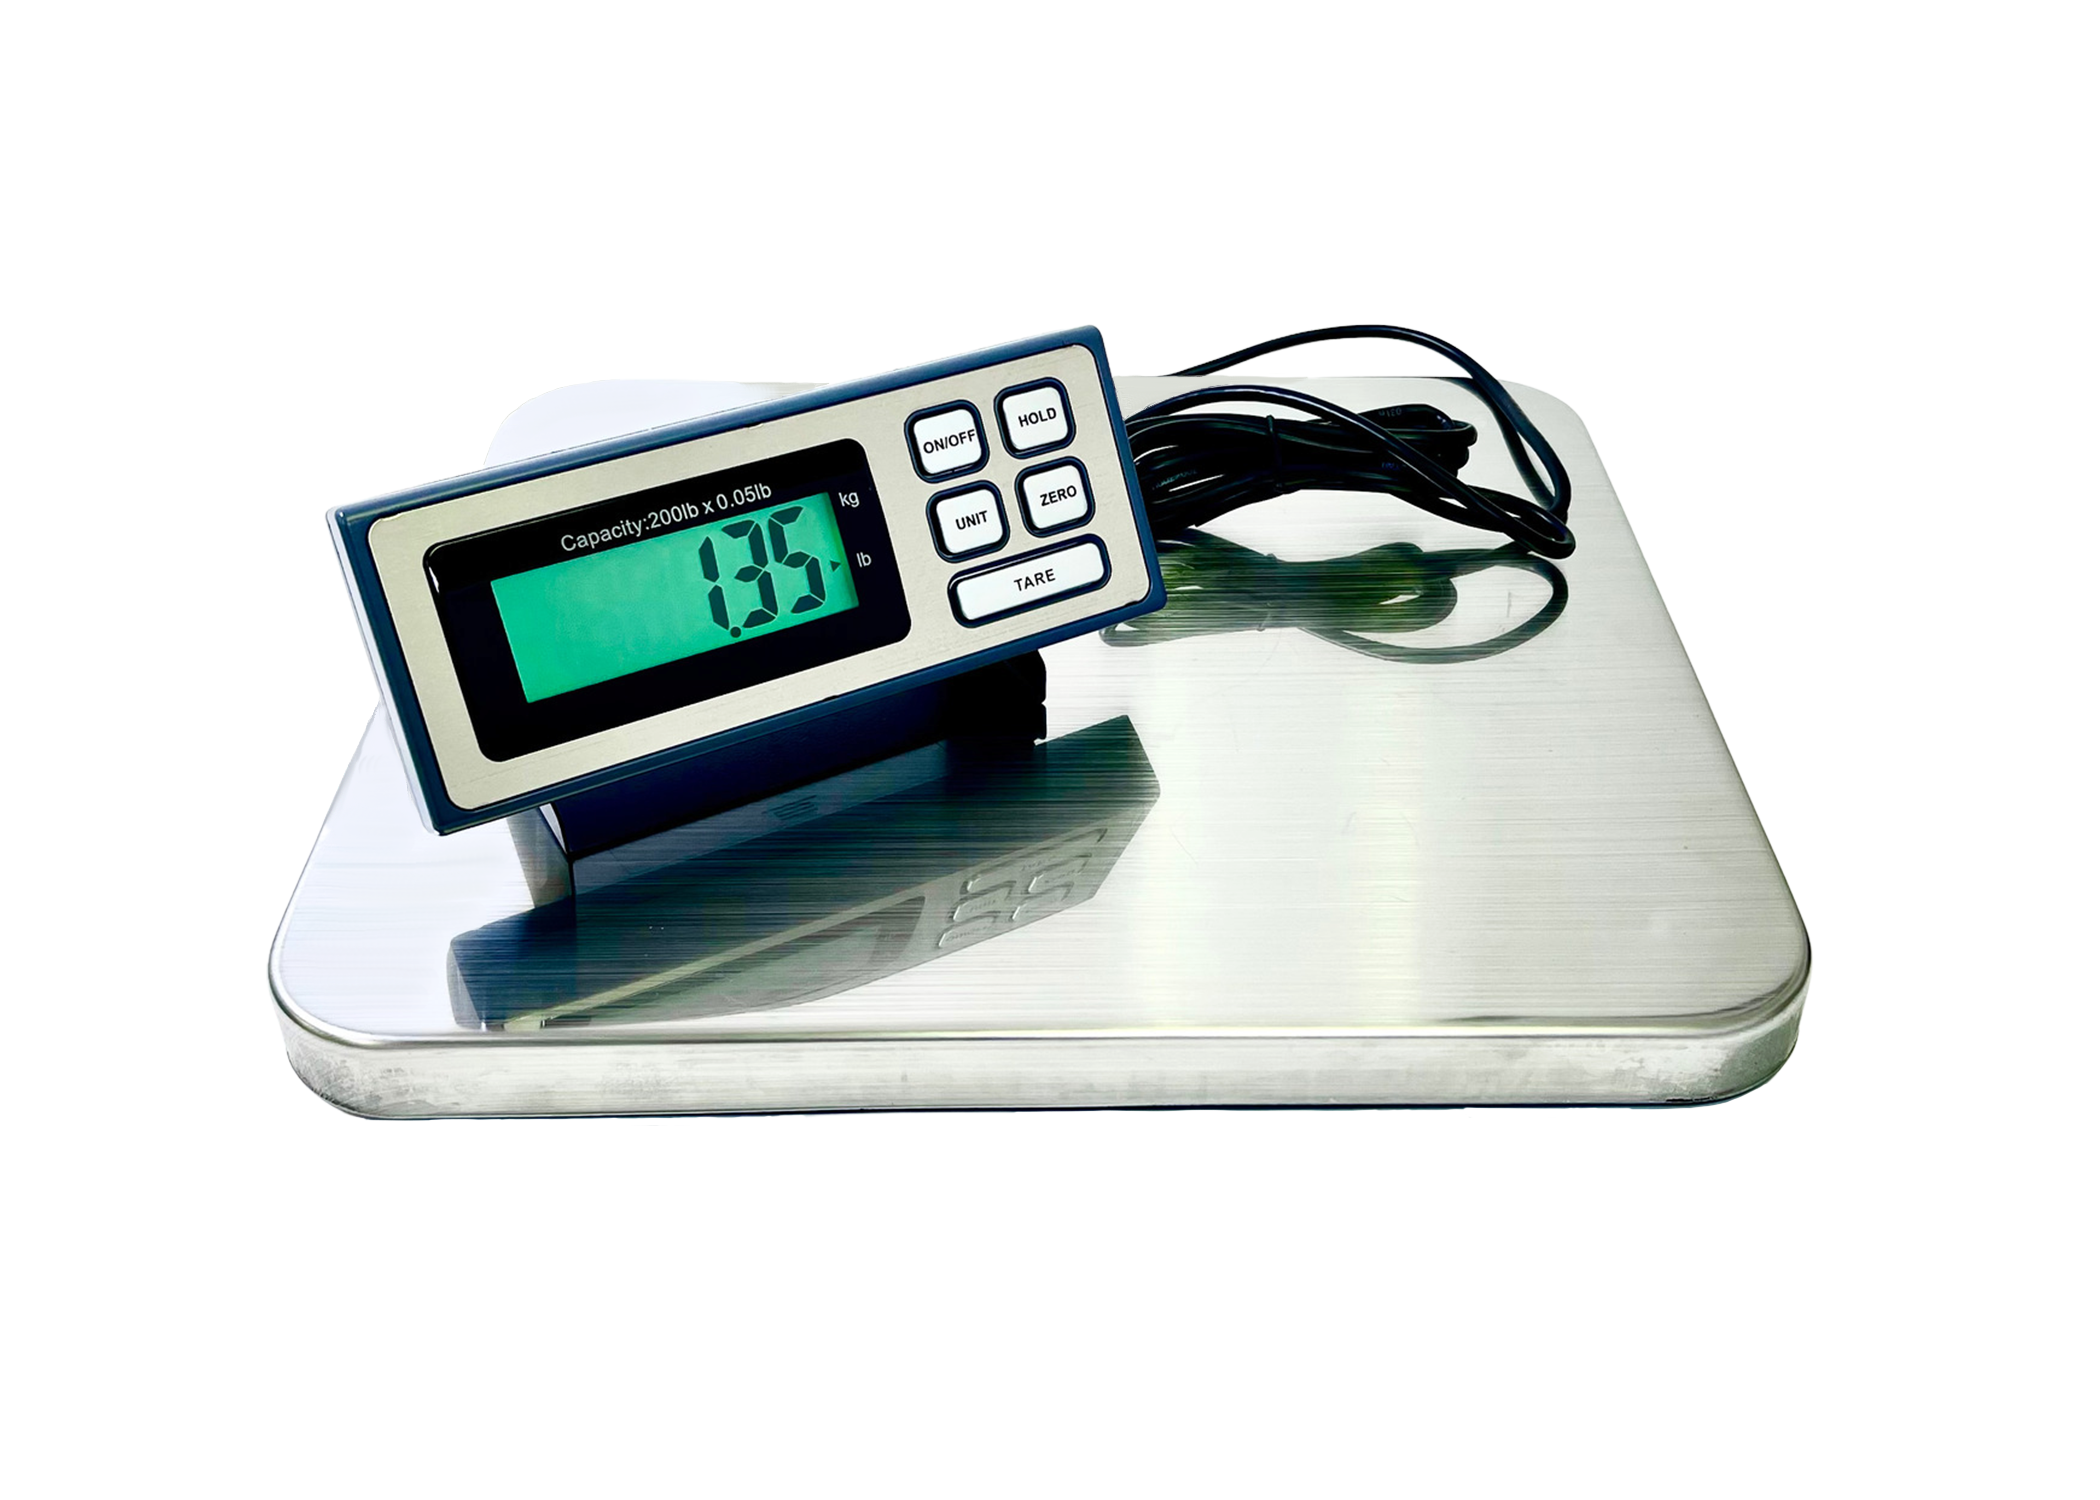 LSS 200 & LSS 400 Large Shipping Scale - Prime USA Scales